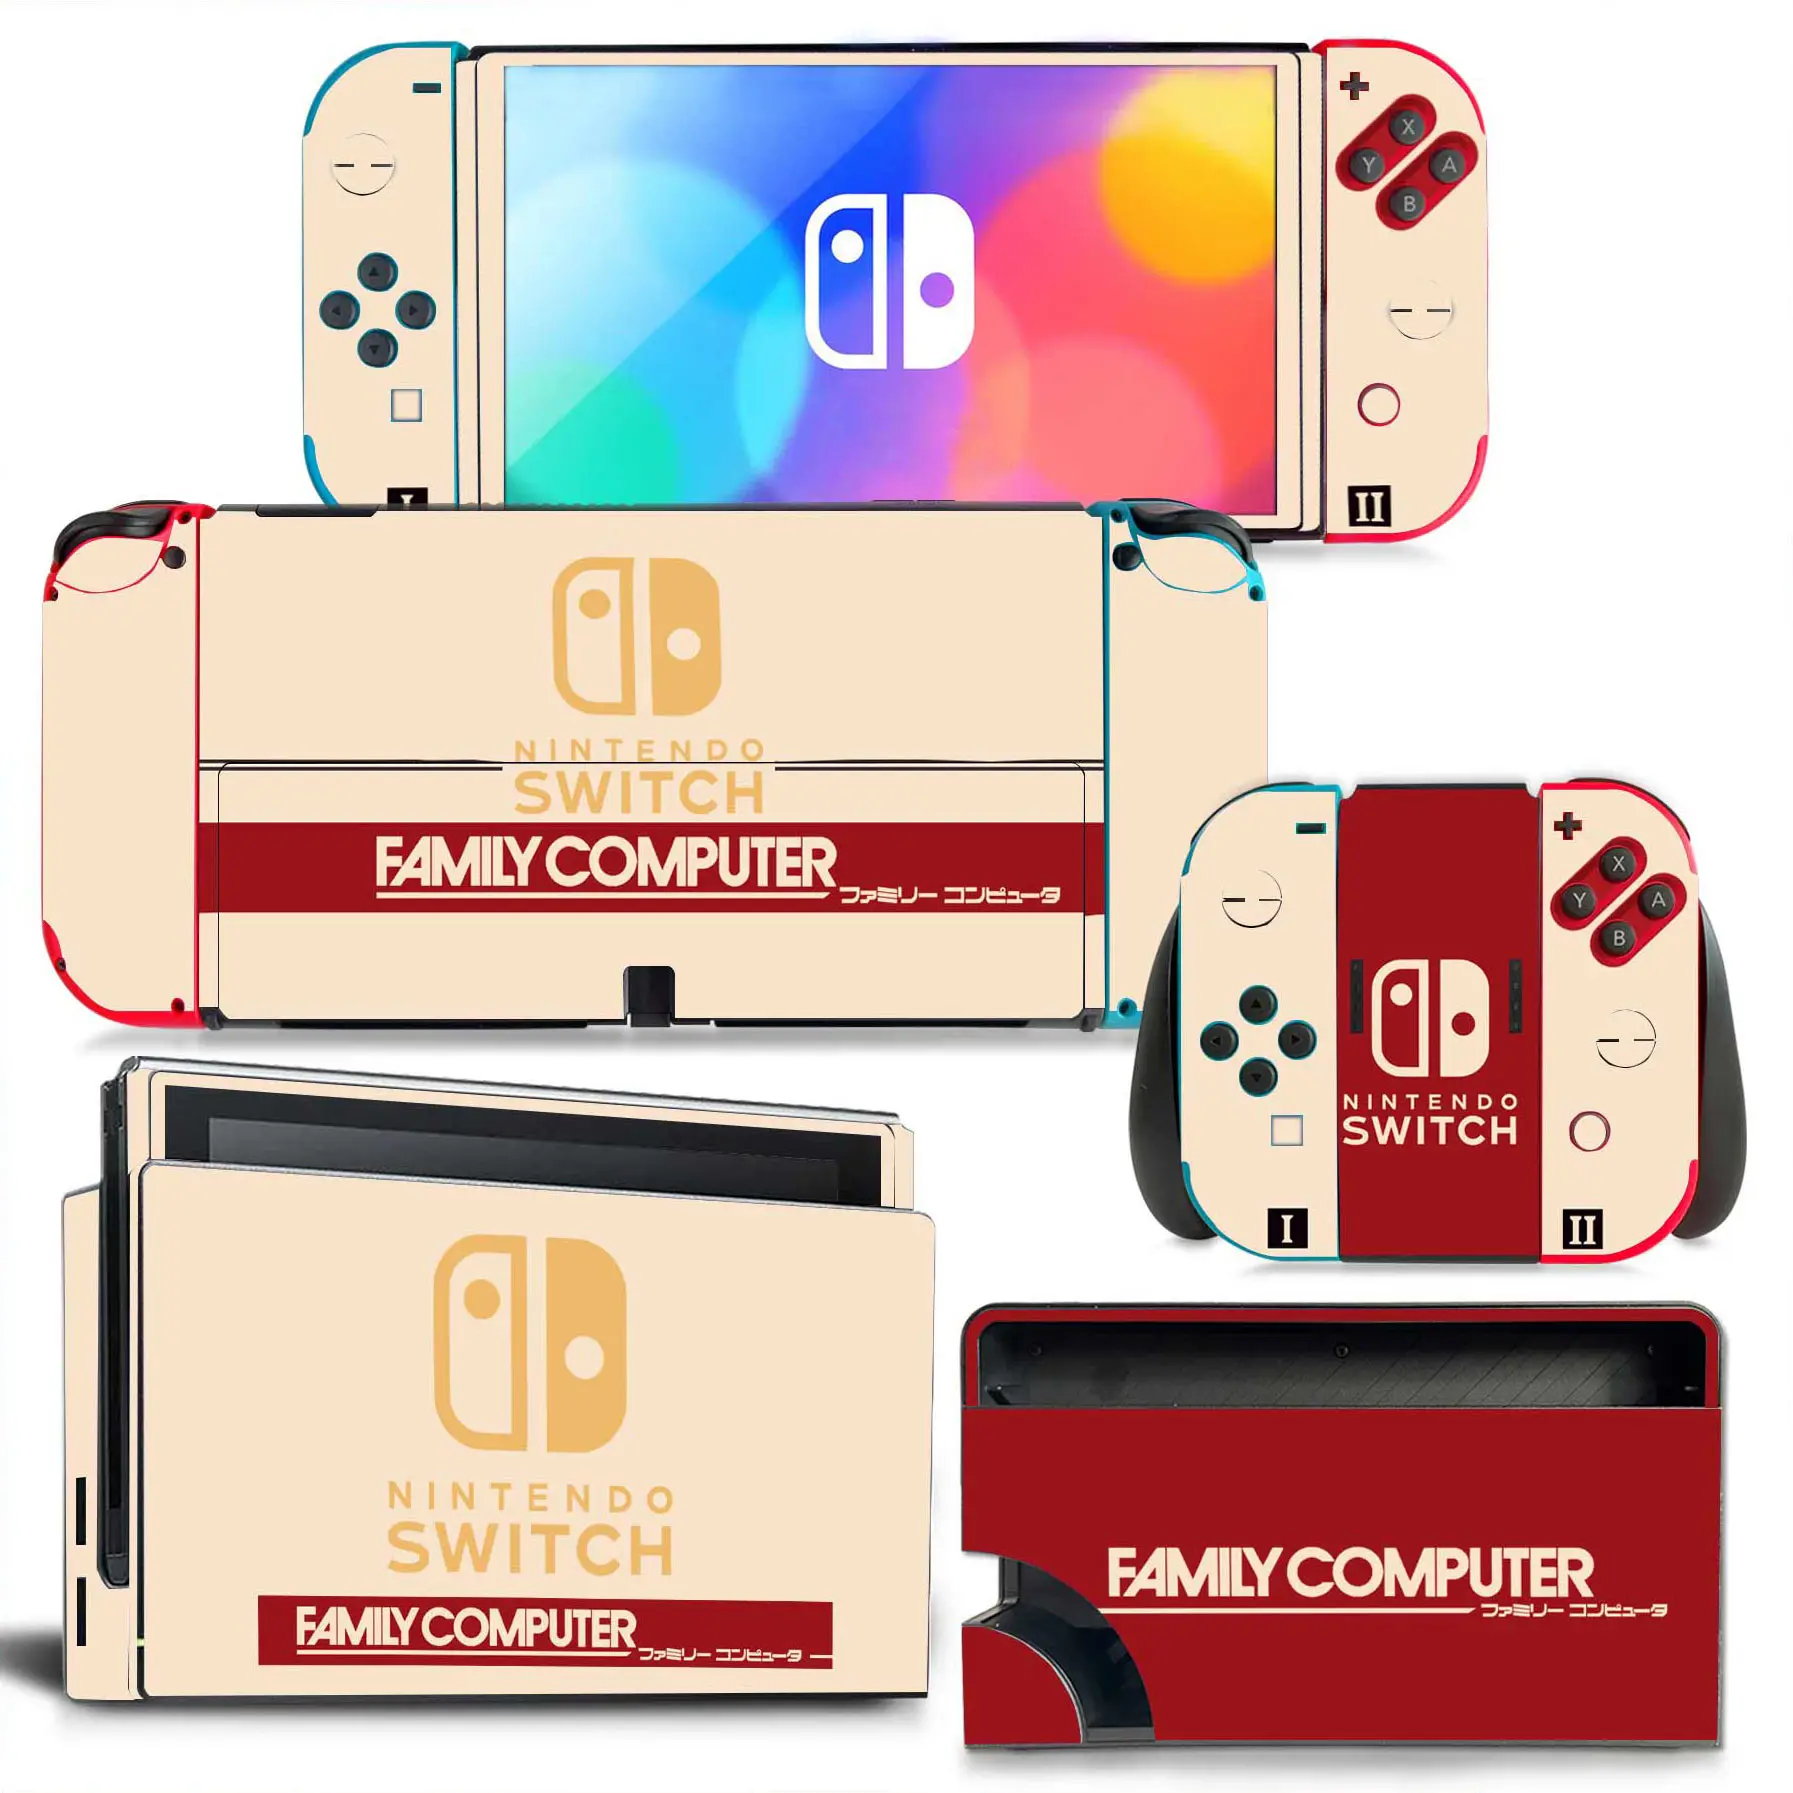 LOGO Switch Oled Skin Sticker Decal Cover for Switch Oled Console Skin Dock Joy Con Wrap Full Wrap Decal NS OLED Vinyl 